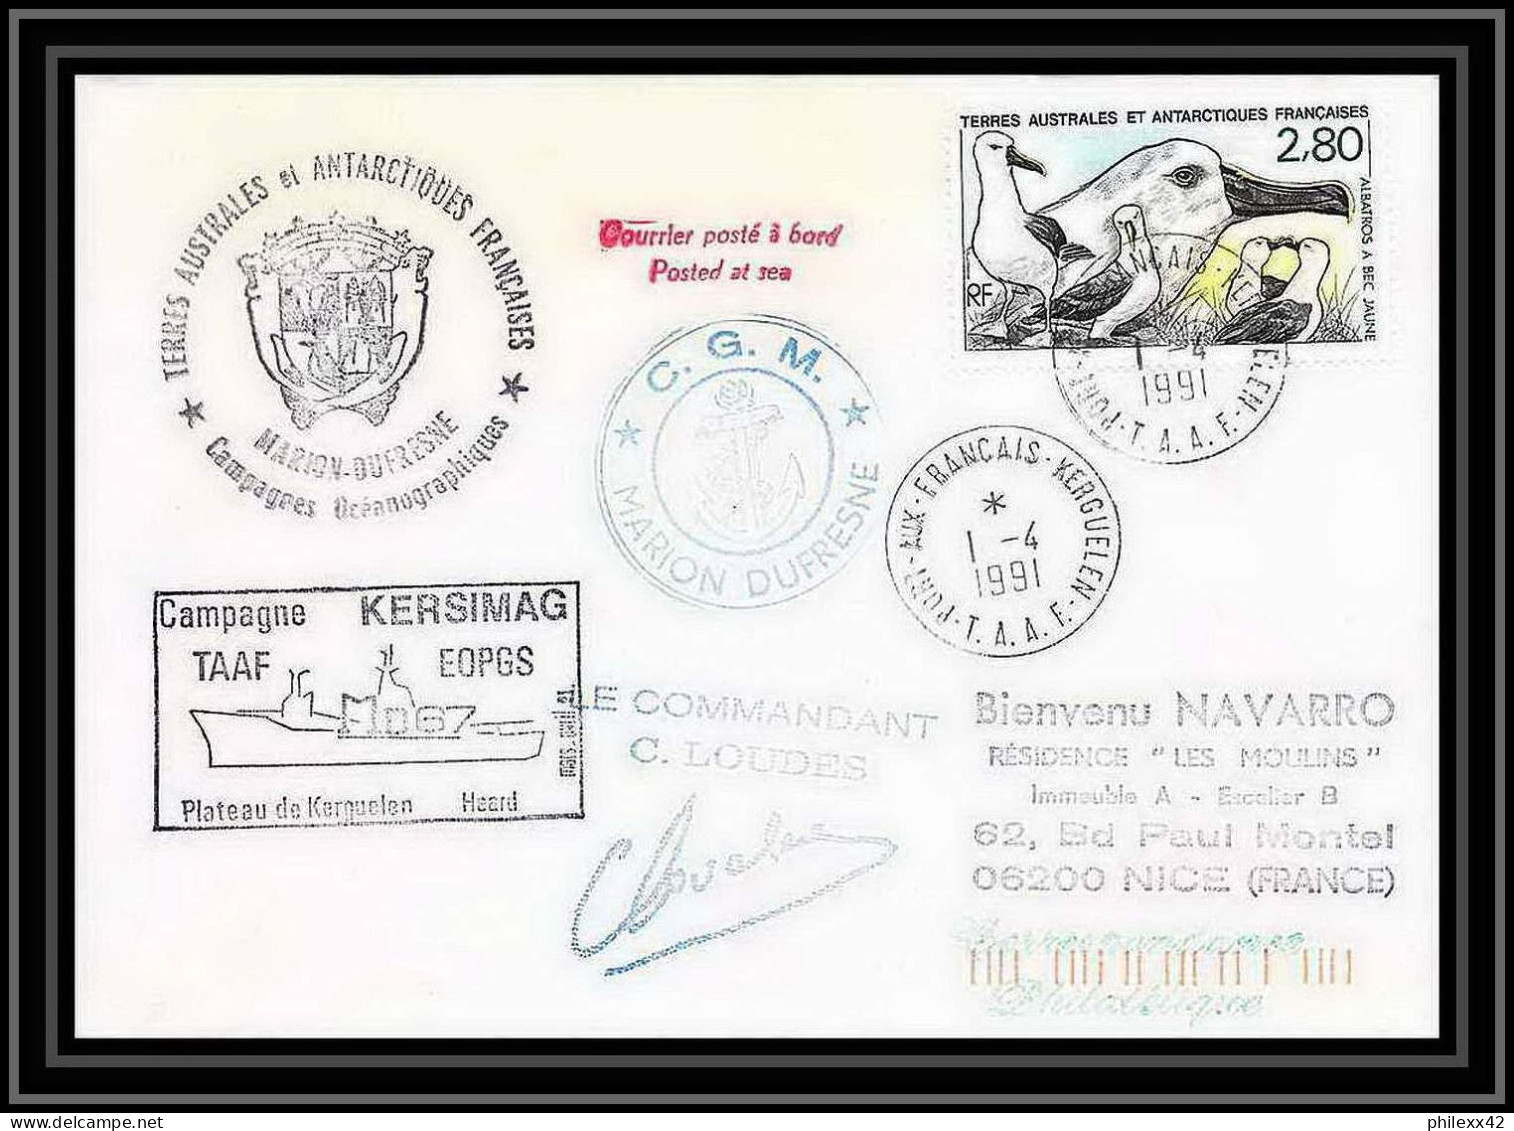 1739 Campagne Mersimag 1/4/1991 Signé Signed Loudes TAAF Antarctic Terres Australes Lettre (cover) - Expéditions Antarctiques